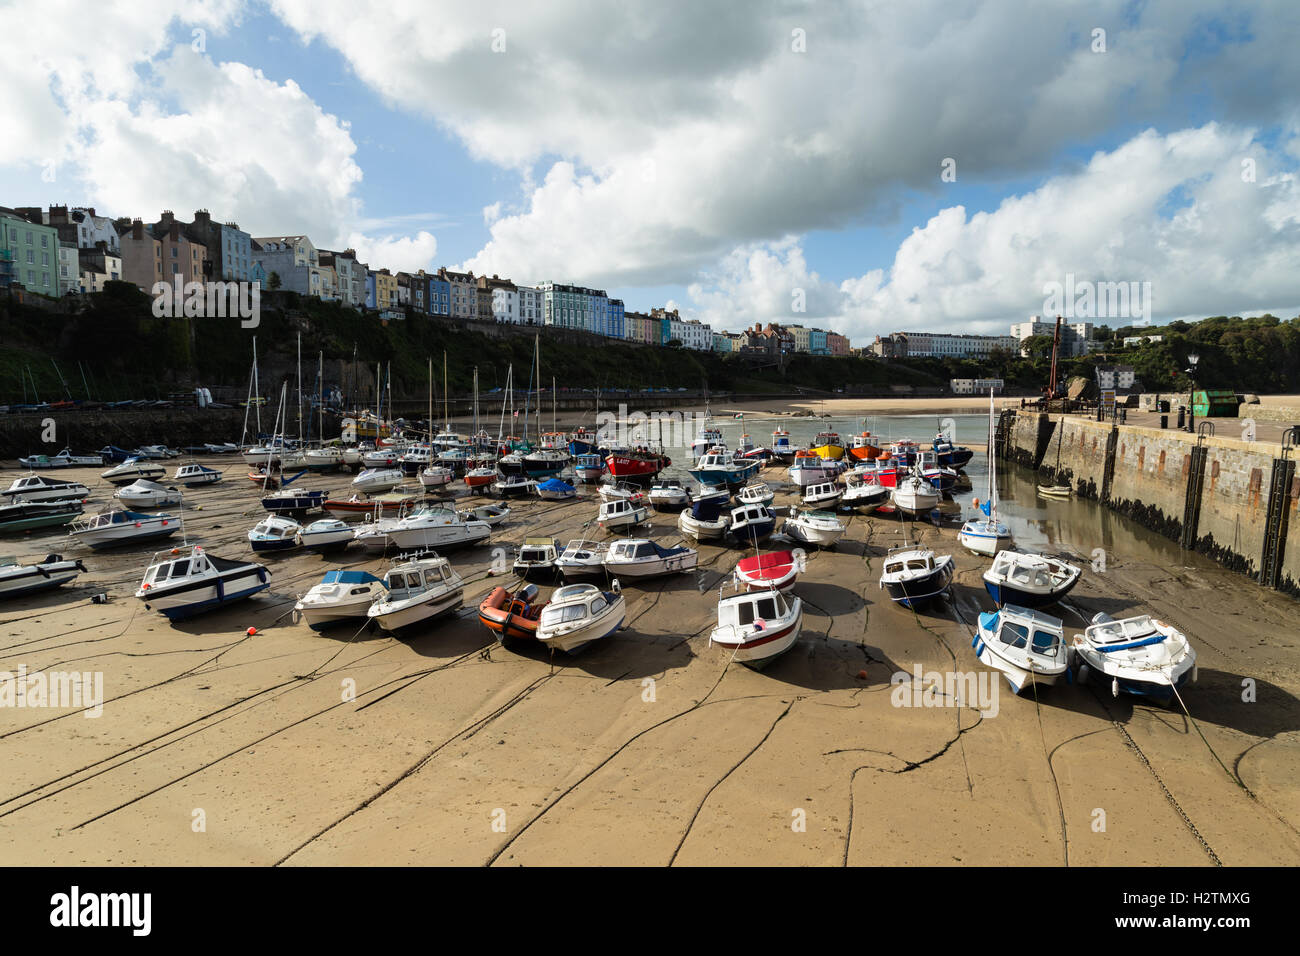 View of Tenby Harbour with fishing boats lined up awaiting the incoming tide, Pembrokeshire, Wales, Stock Photo